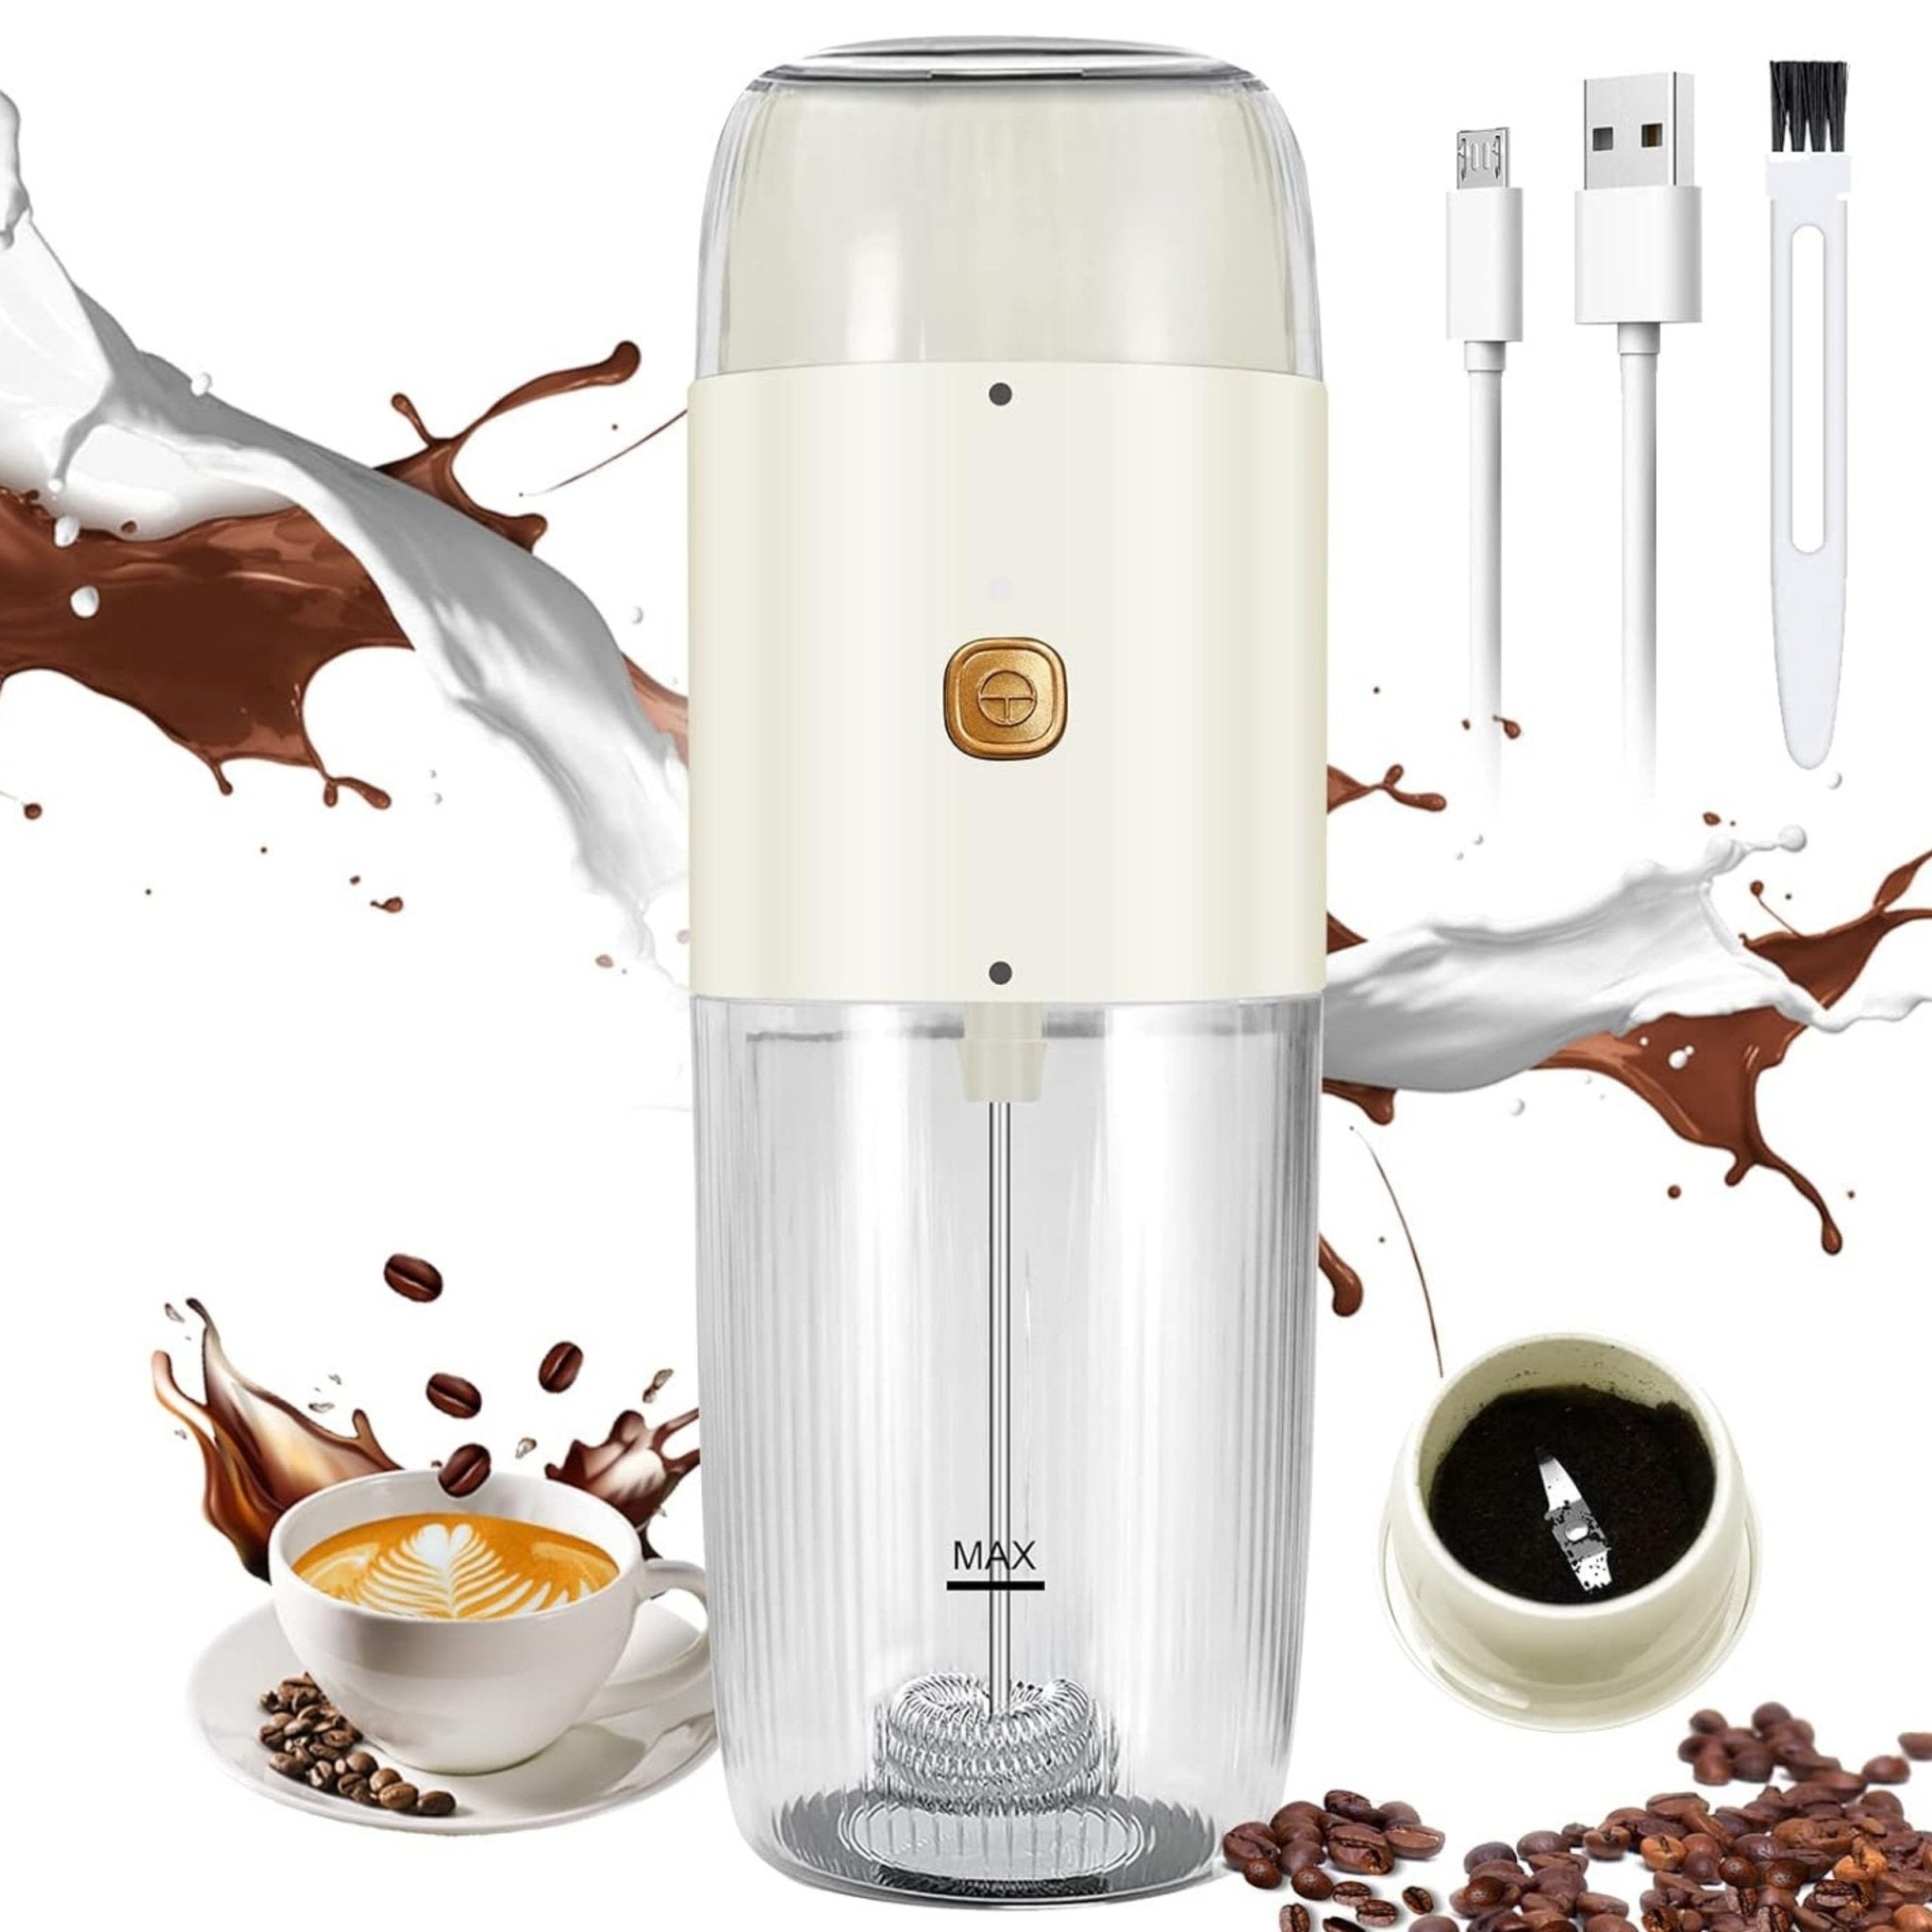 LePresso 2 in 1 Coffee Grinder & Milk Frothing 150ml - White